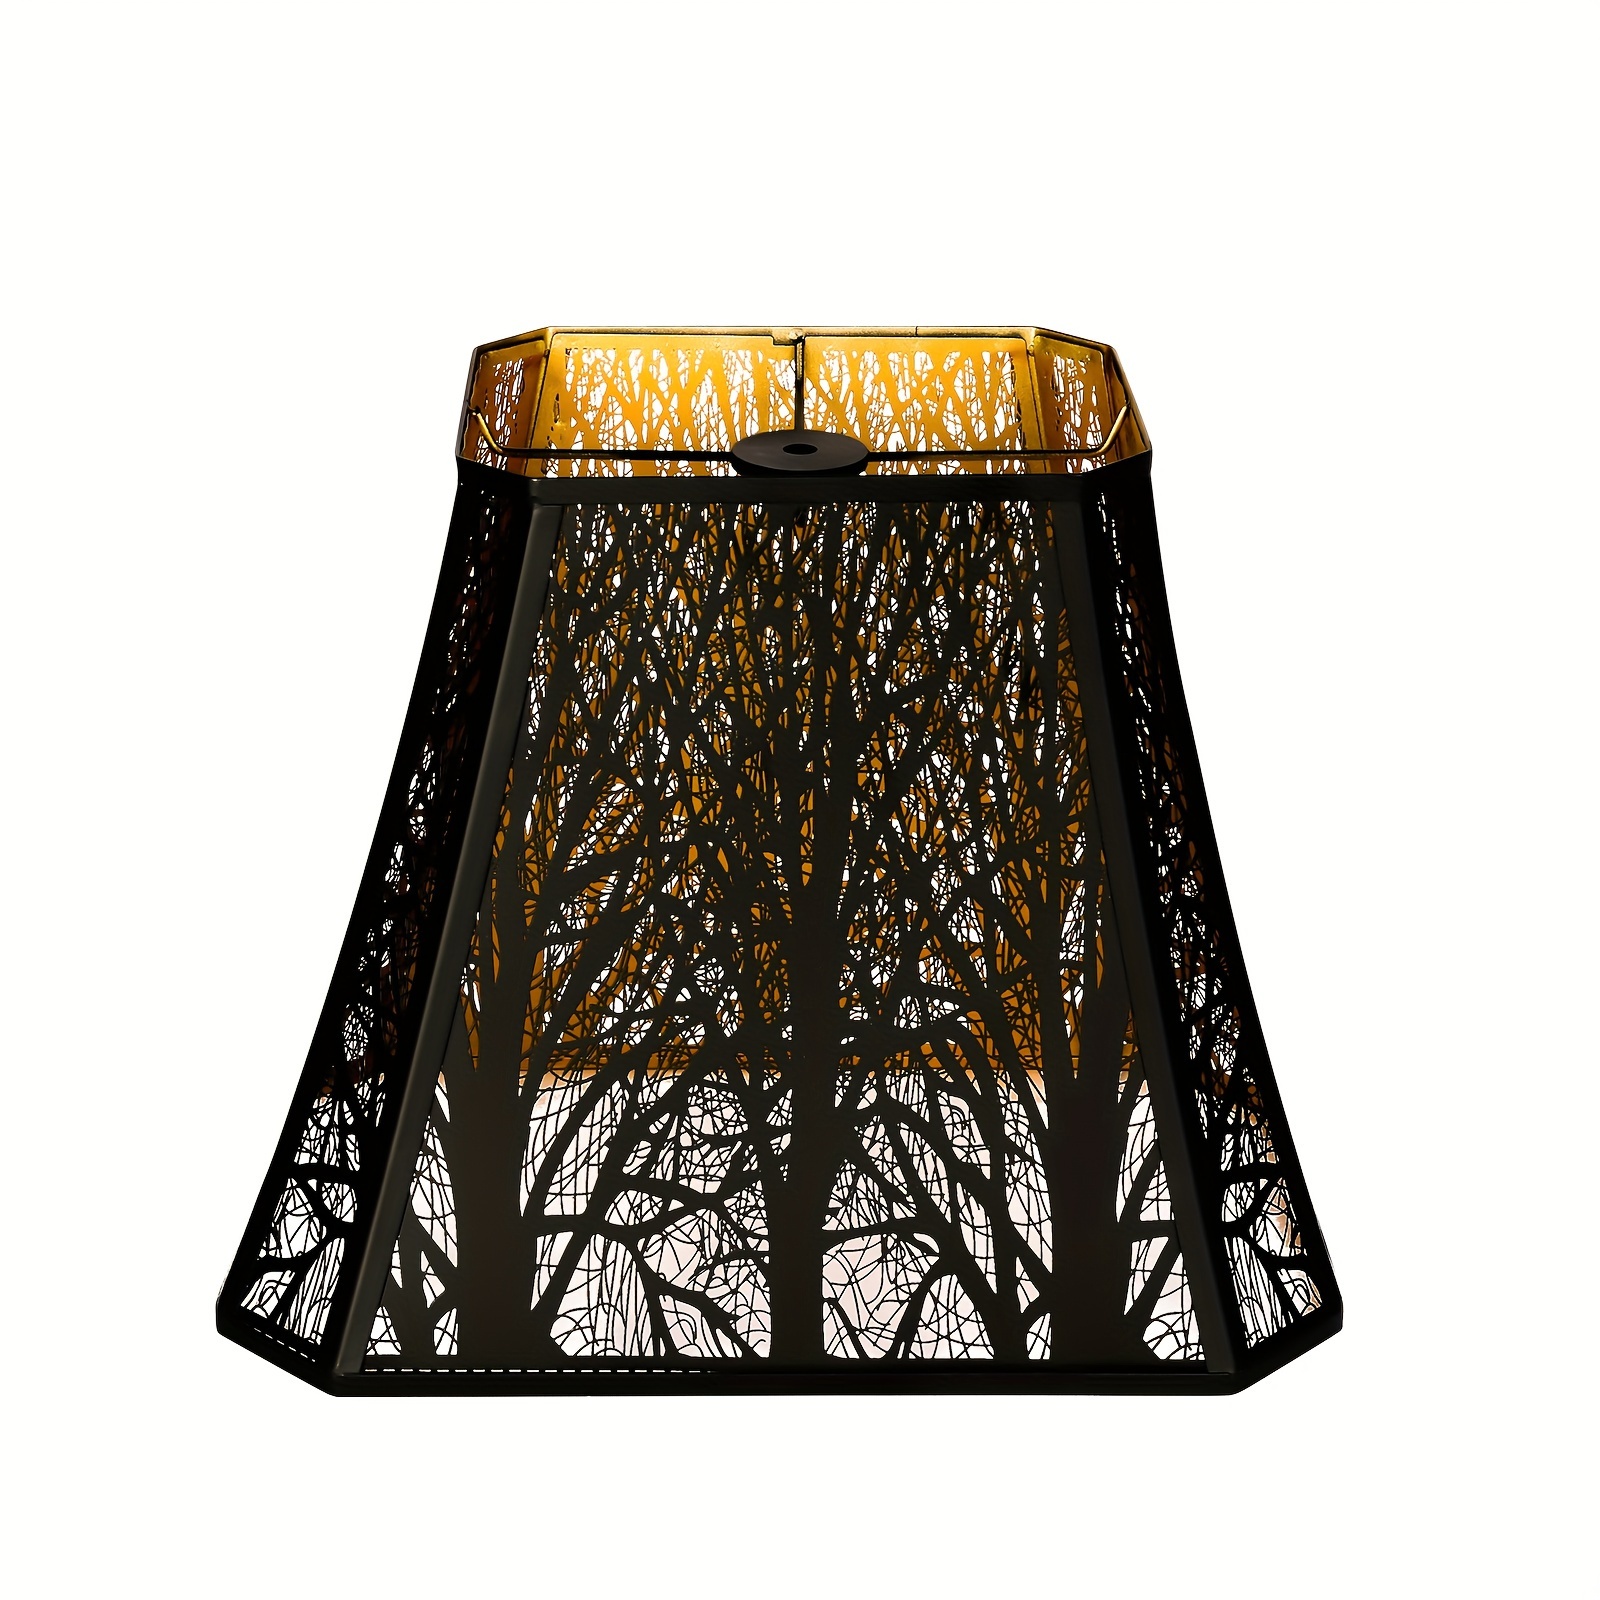 

1pc Rectangular Etched Wood Metal Lamp Shade, (black On The Outside, Gold On The Inside) 8"*11"*13.9